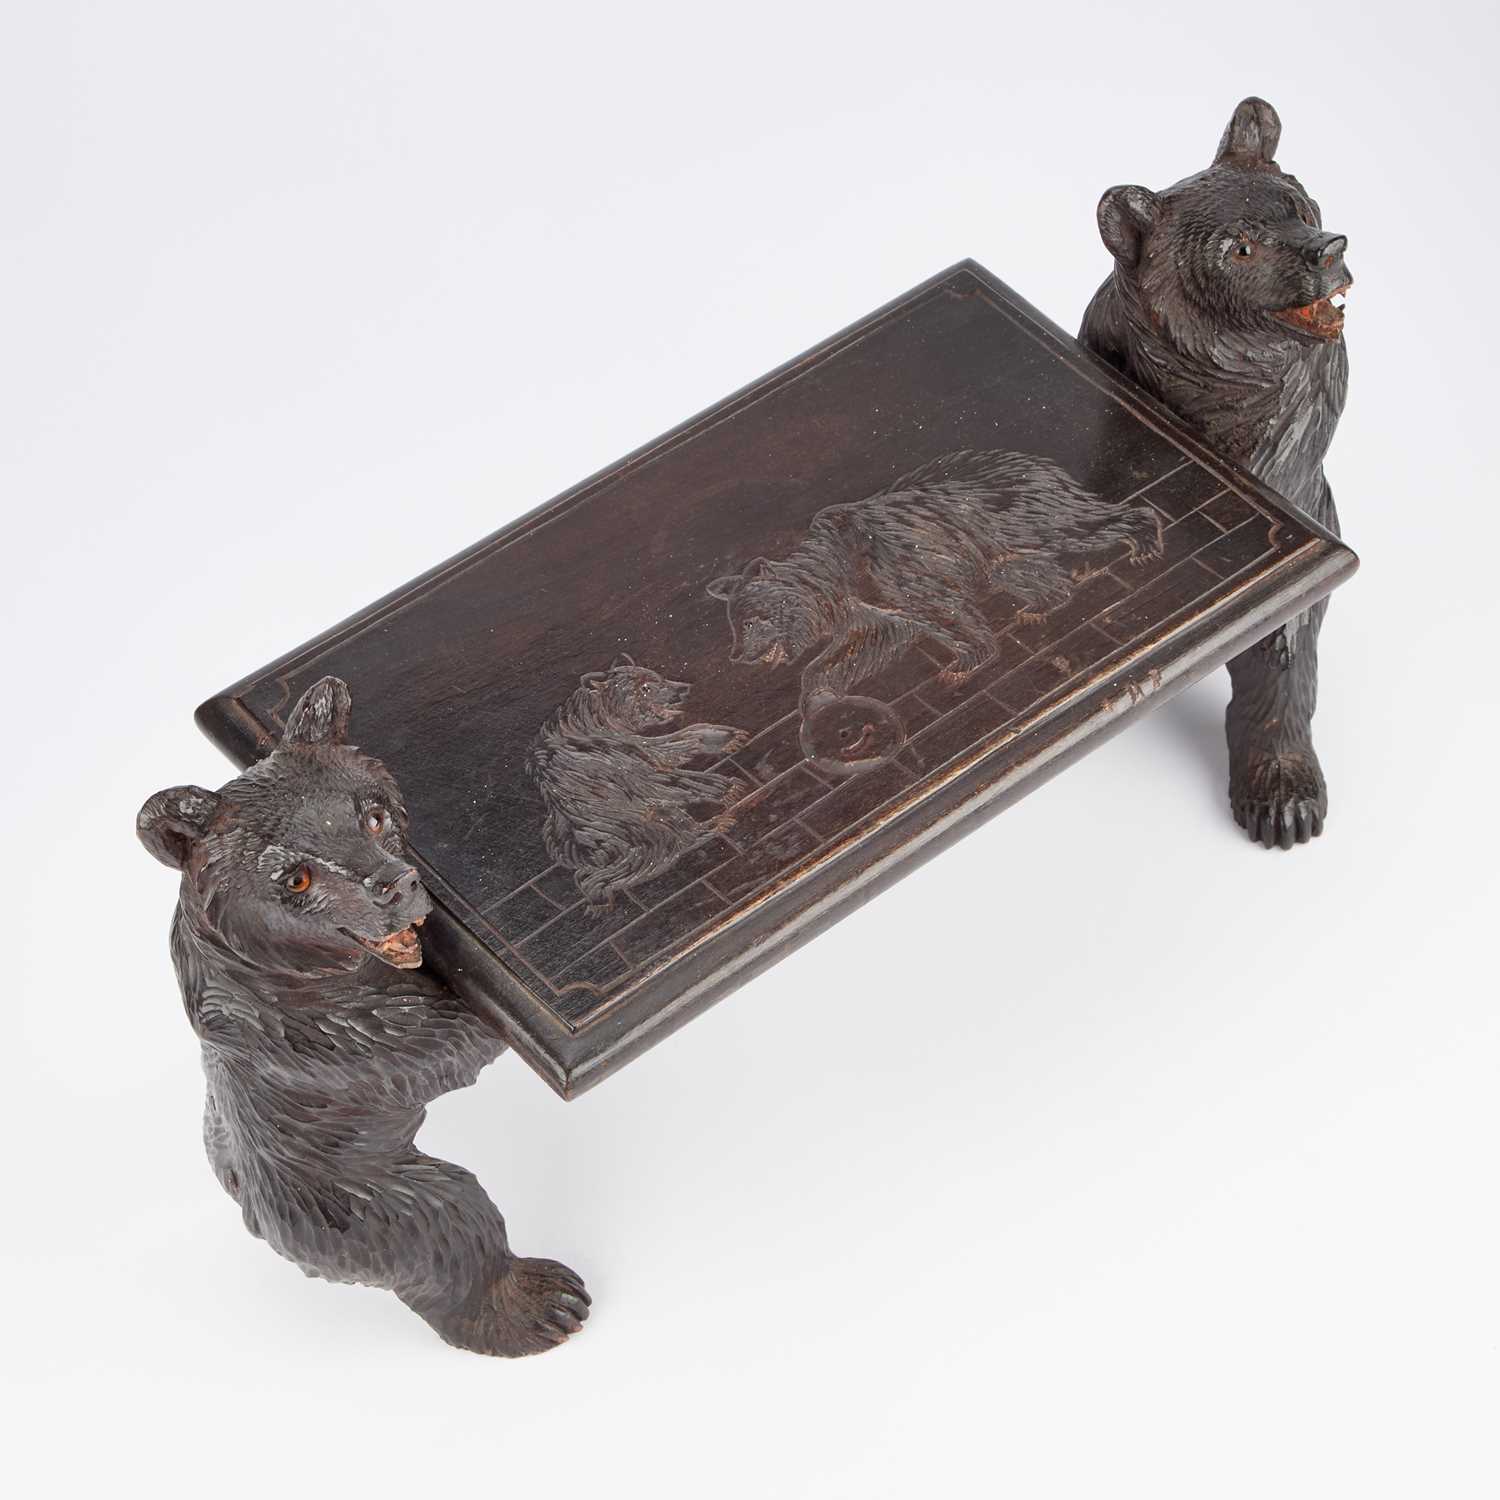 A BLACK FOREST MINIATURE 'BEAR' BENCH OR TABLE, LATE 19TH CENTURY - Image 3 of 3